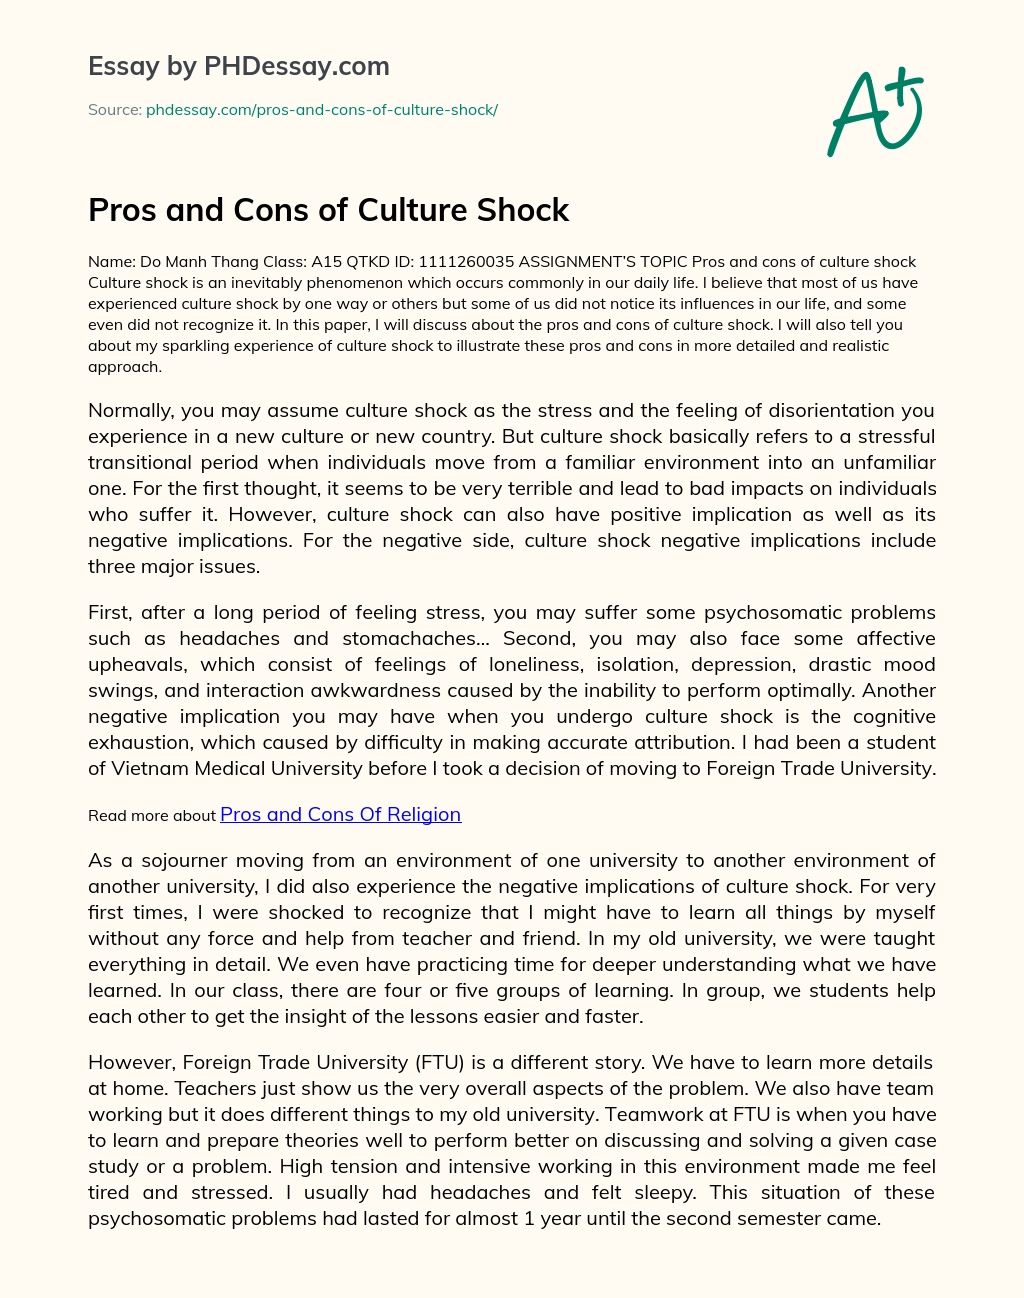 Pros and Cons of Culture Shock essay